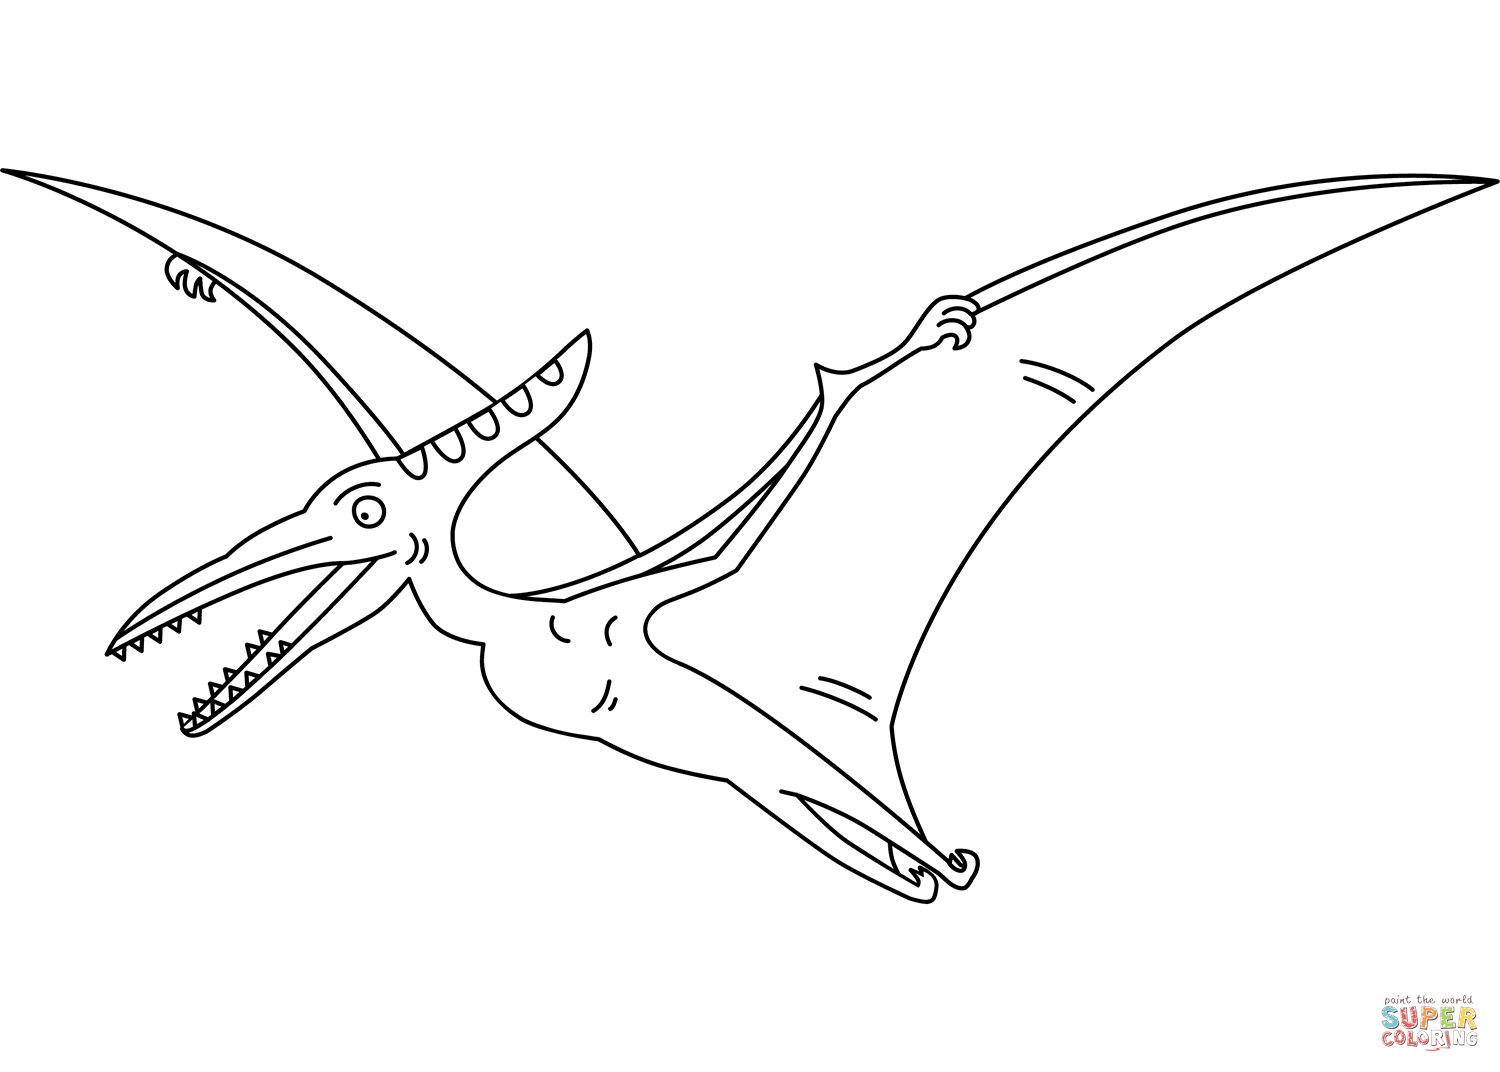 Pterodactyl coloring page free printable coloring pages